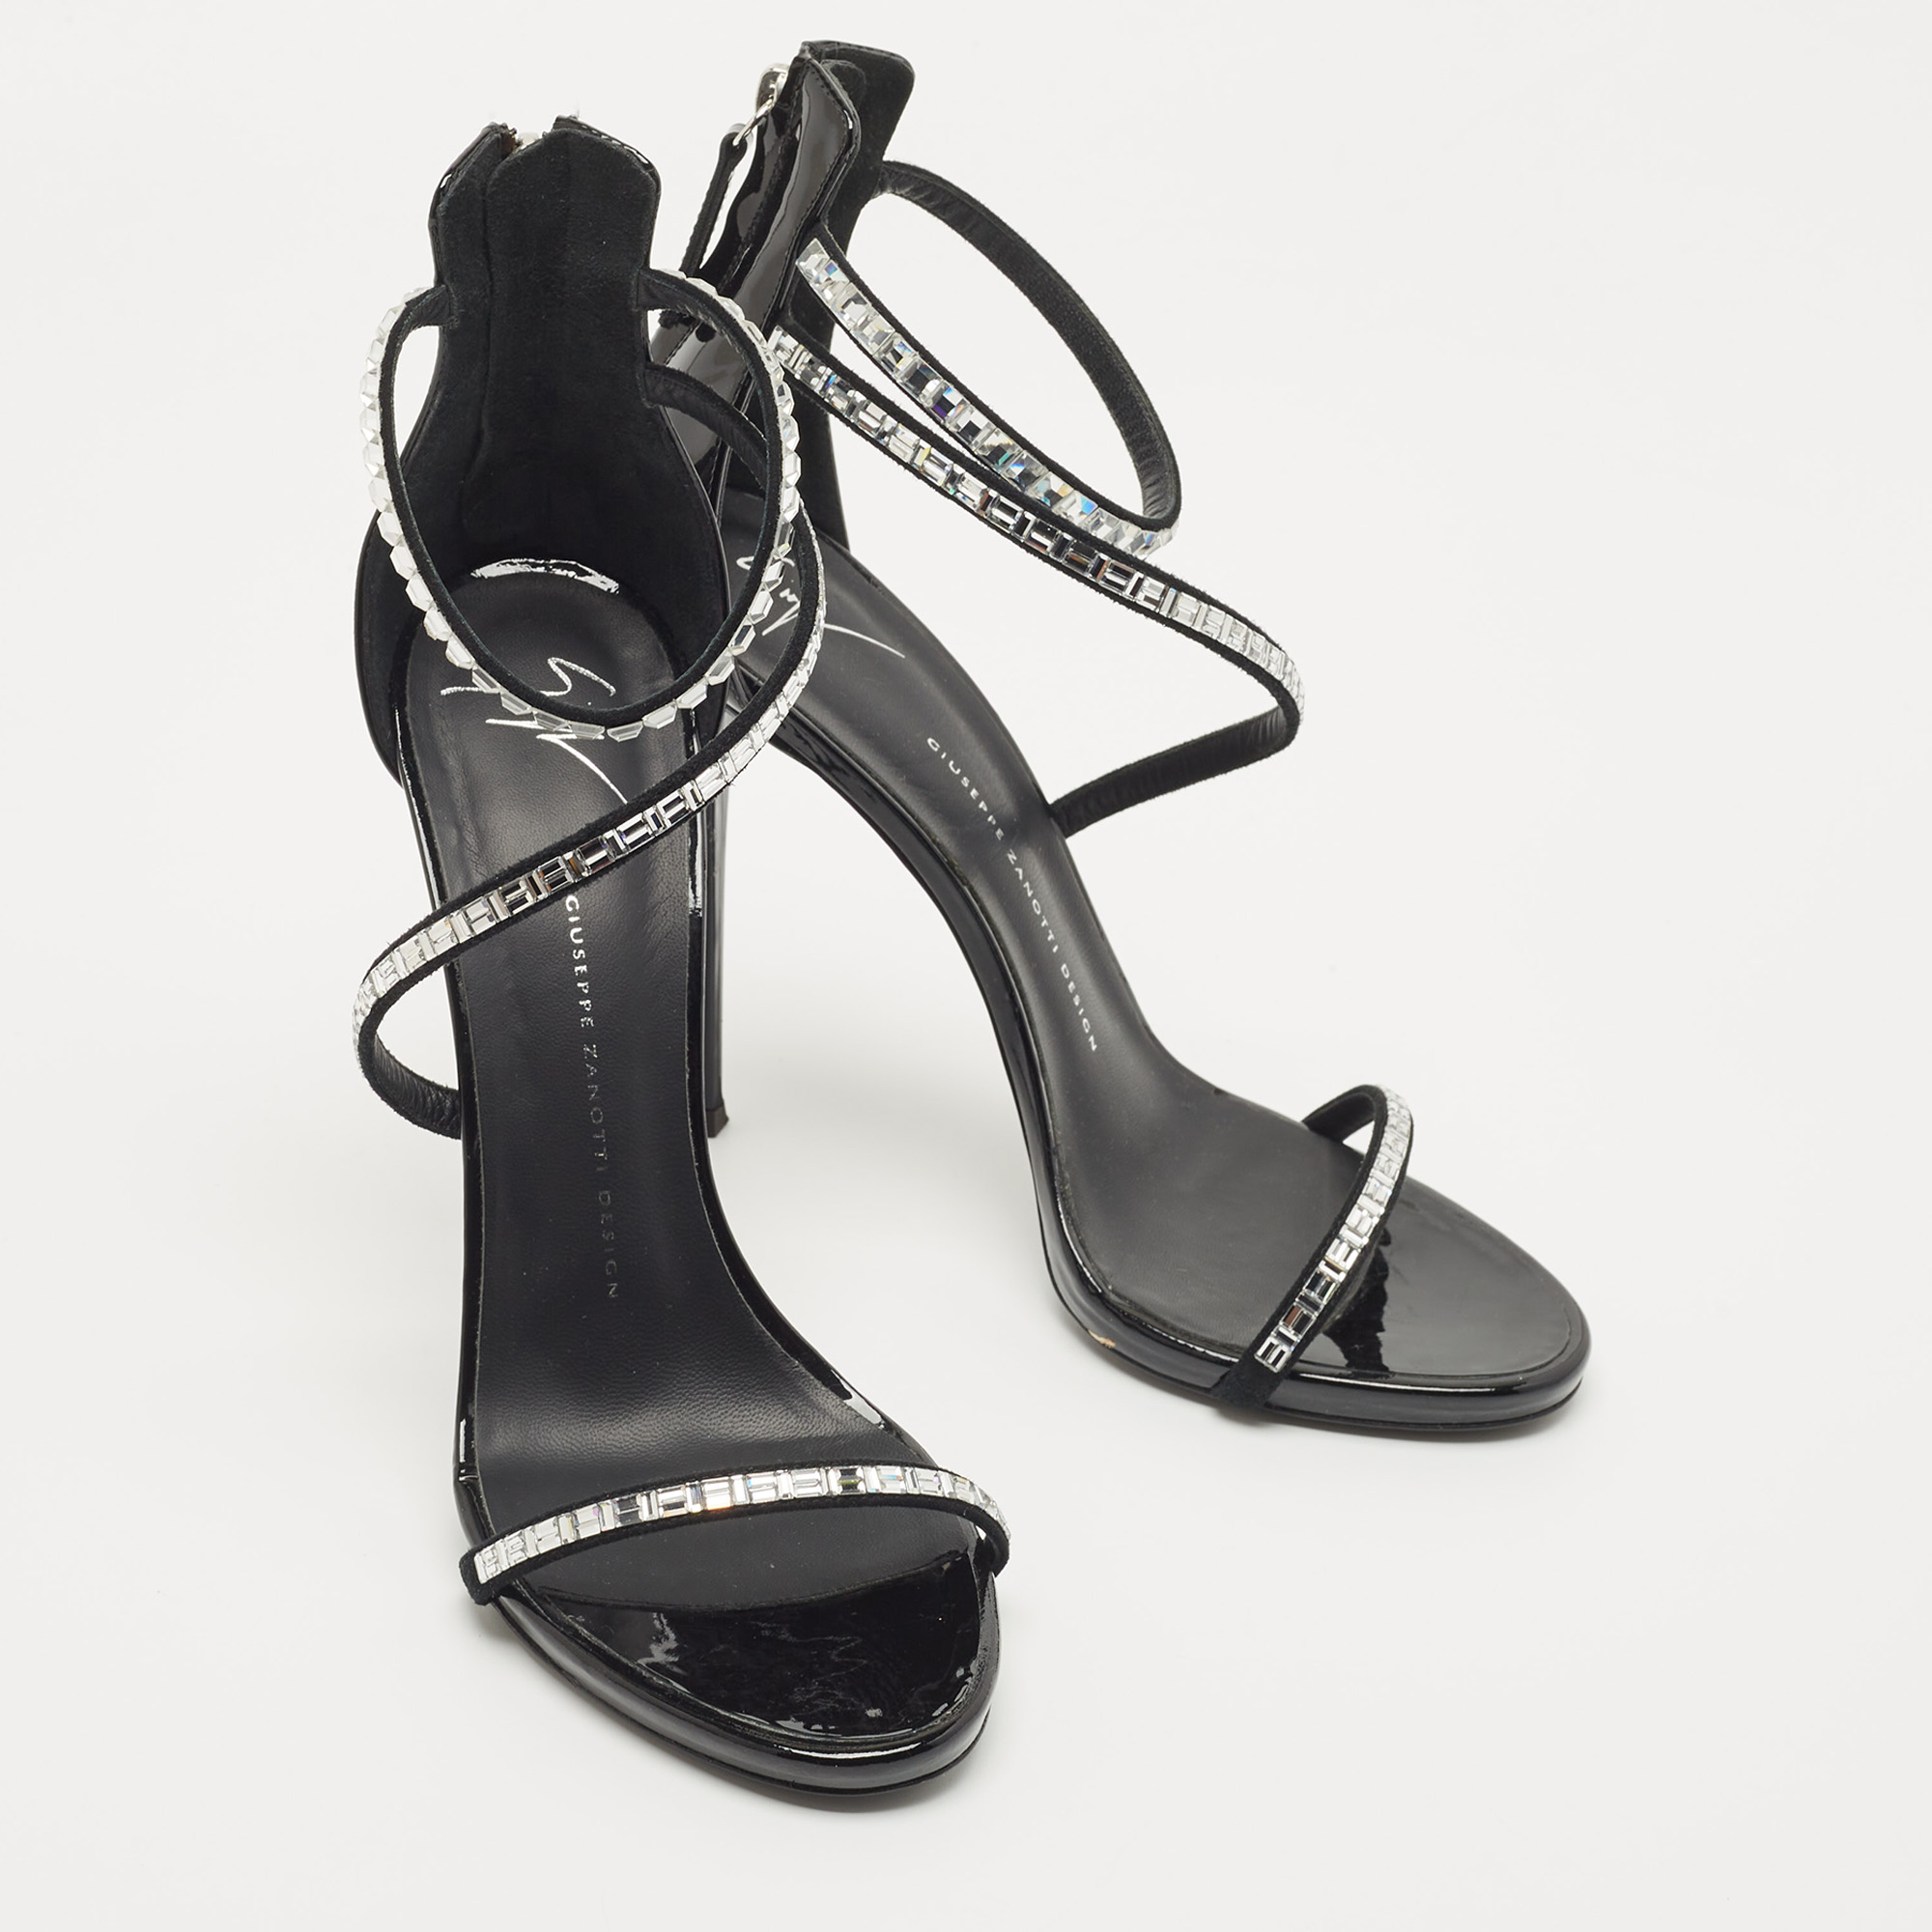 Giuseppe Zannoti Black Patent Leather And Suede Callipe Crystal Embellished Strappy Sandals Size 40